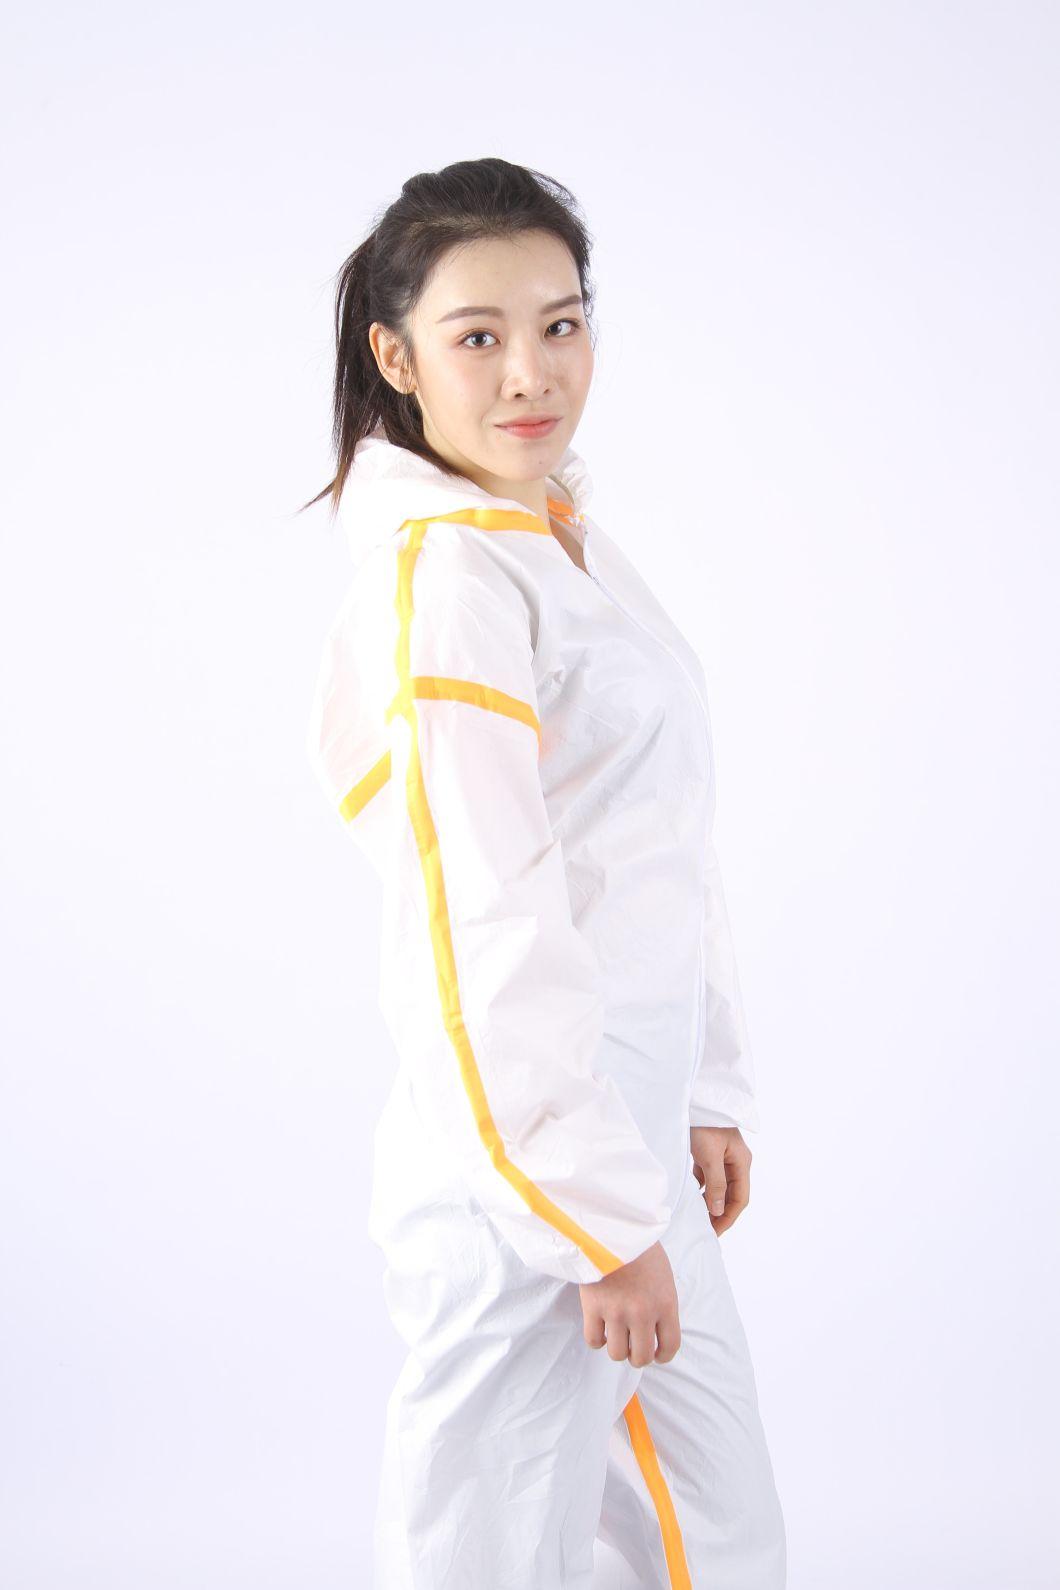 Disposable Nonwoven Protective Coverall Sf Mocroporous with/Without Tap